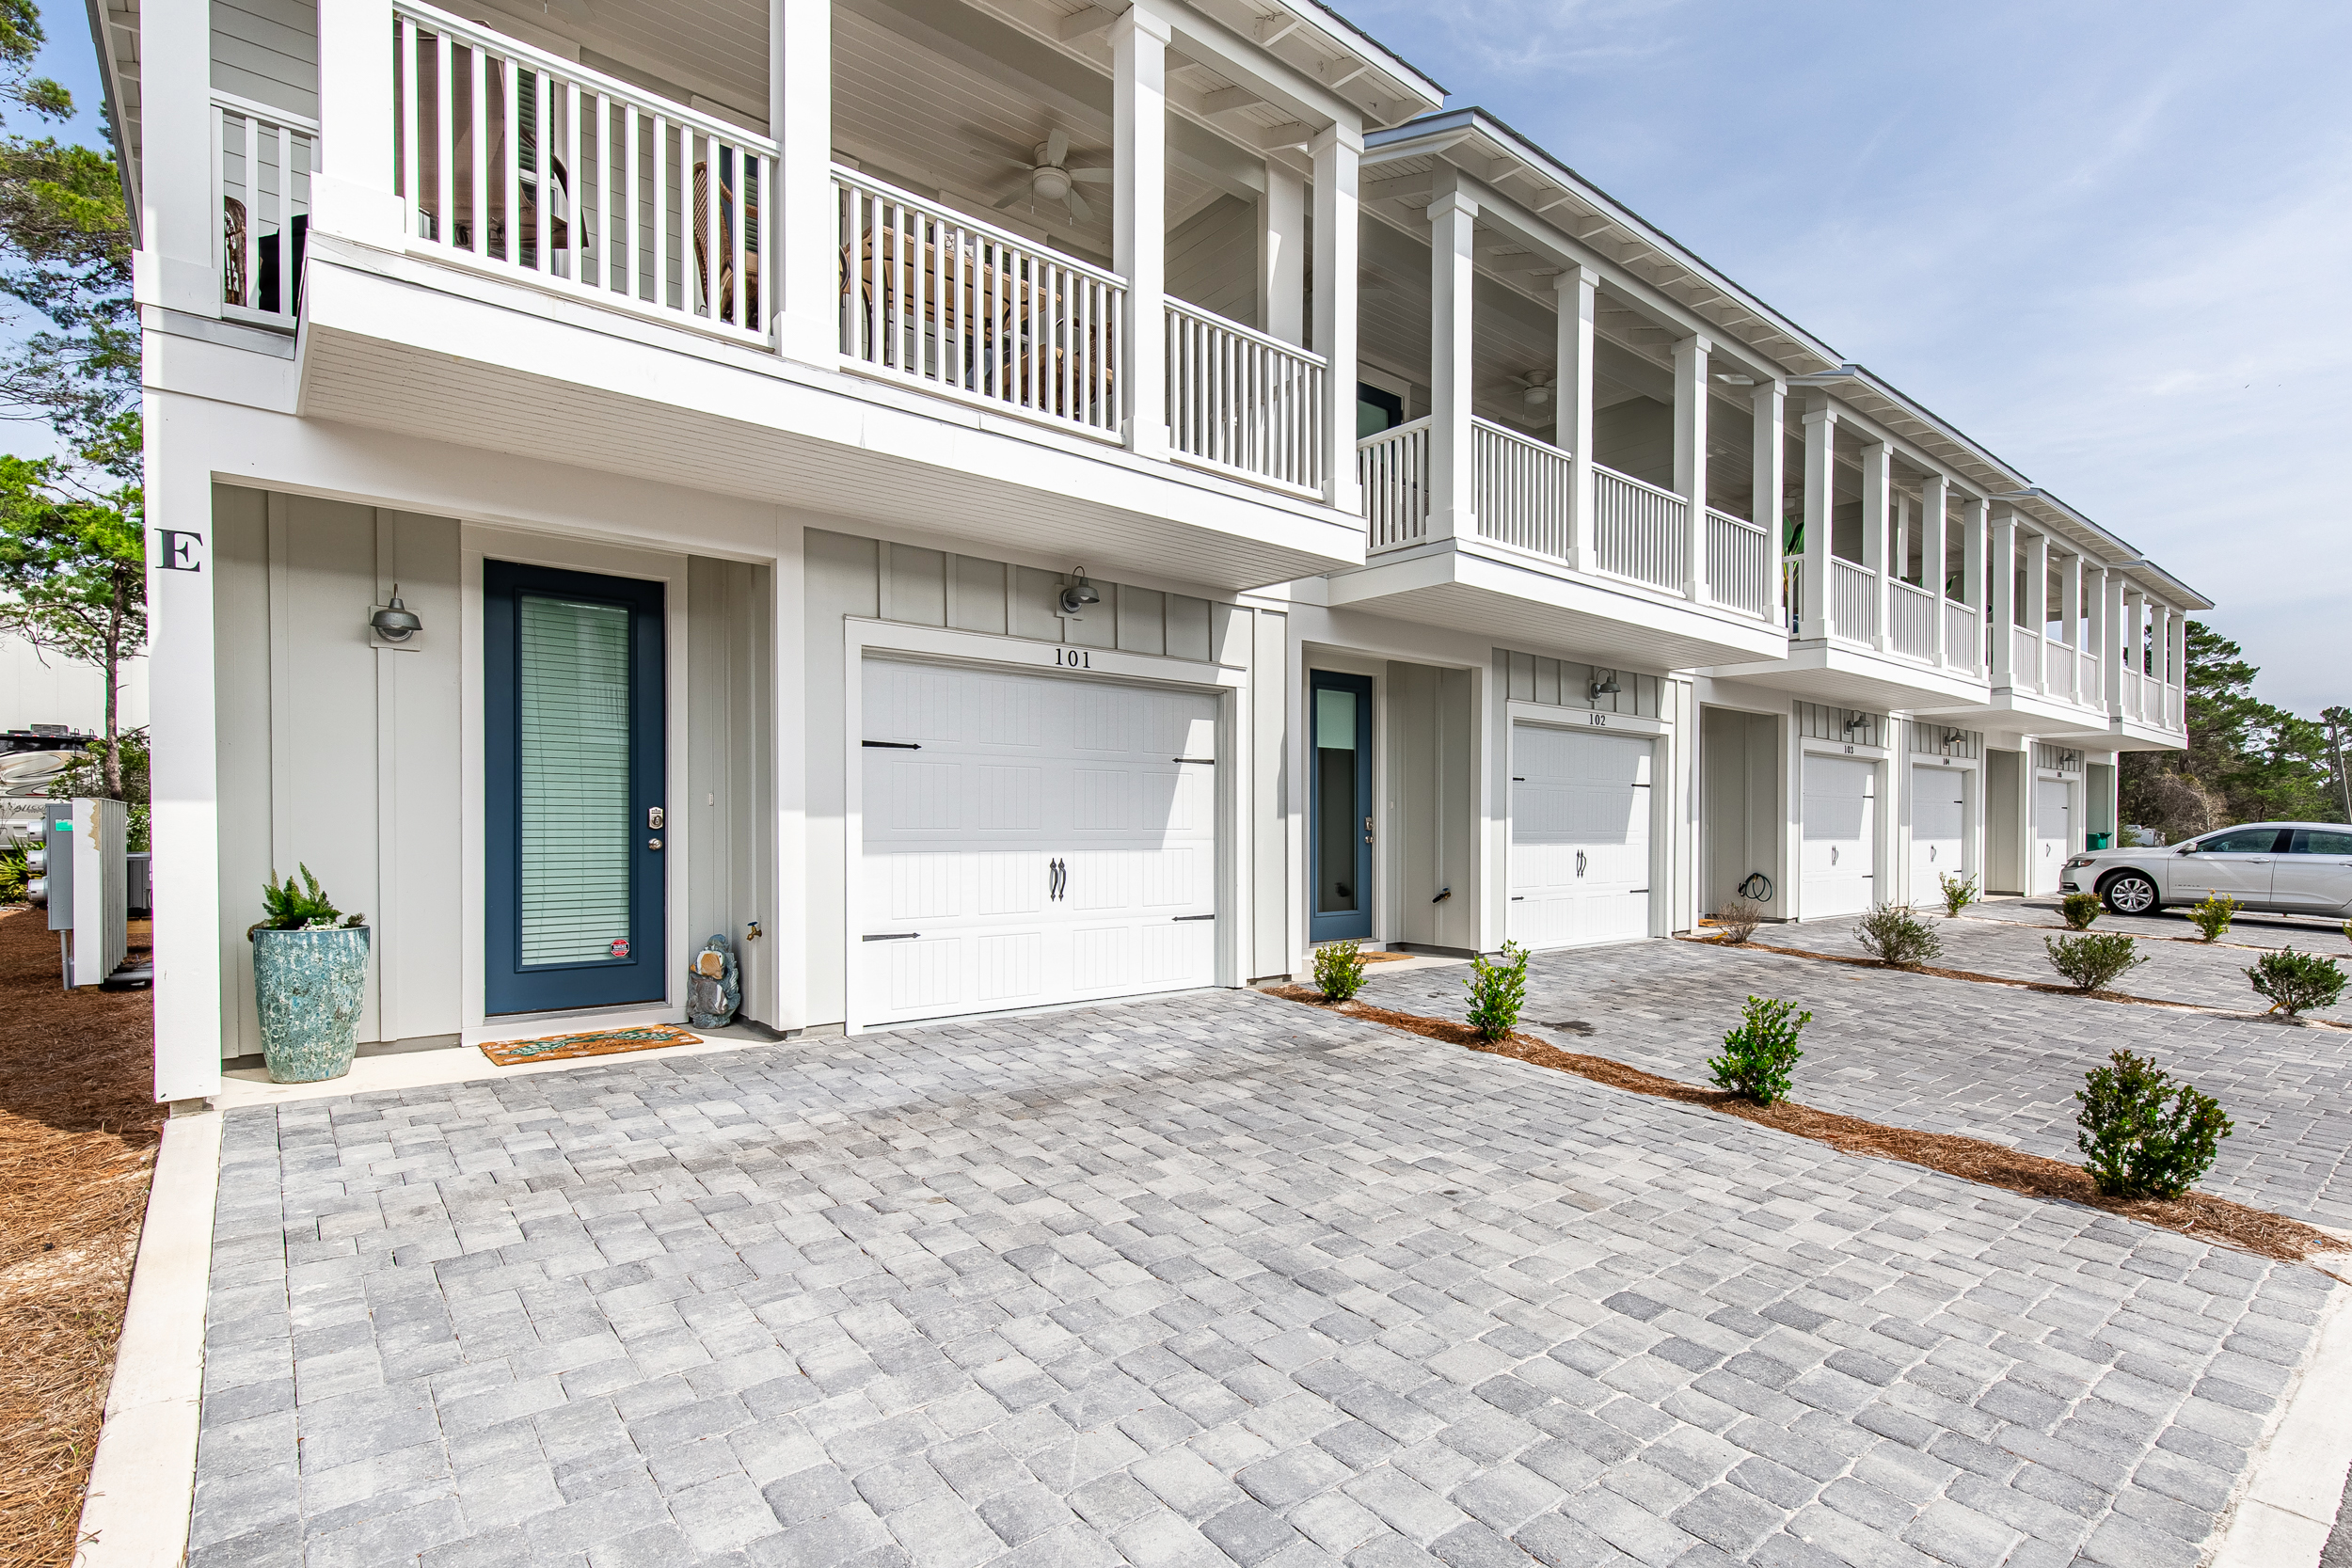 Inn to the Mystic - Townhomes of Seagrove